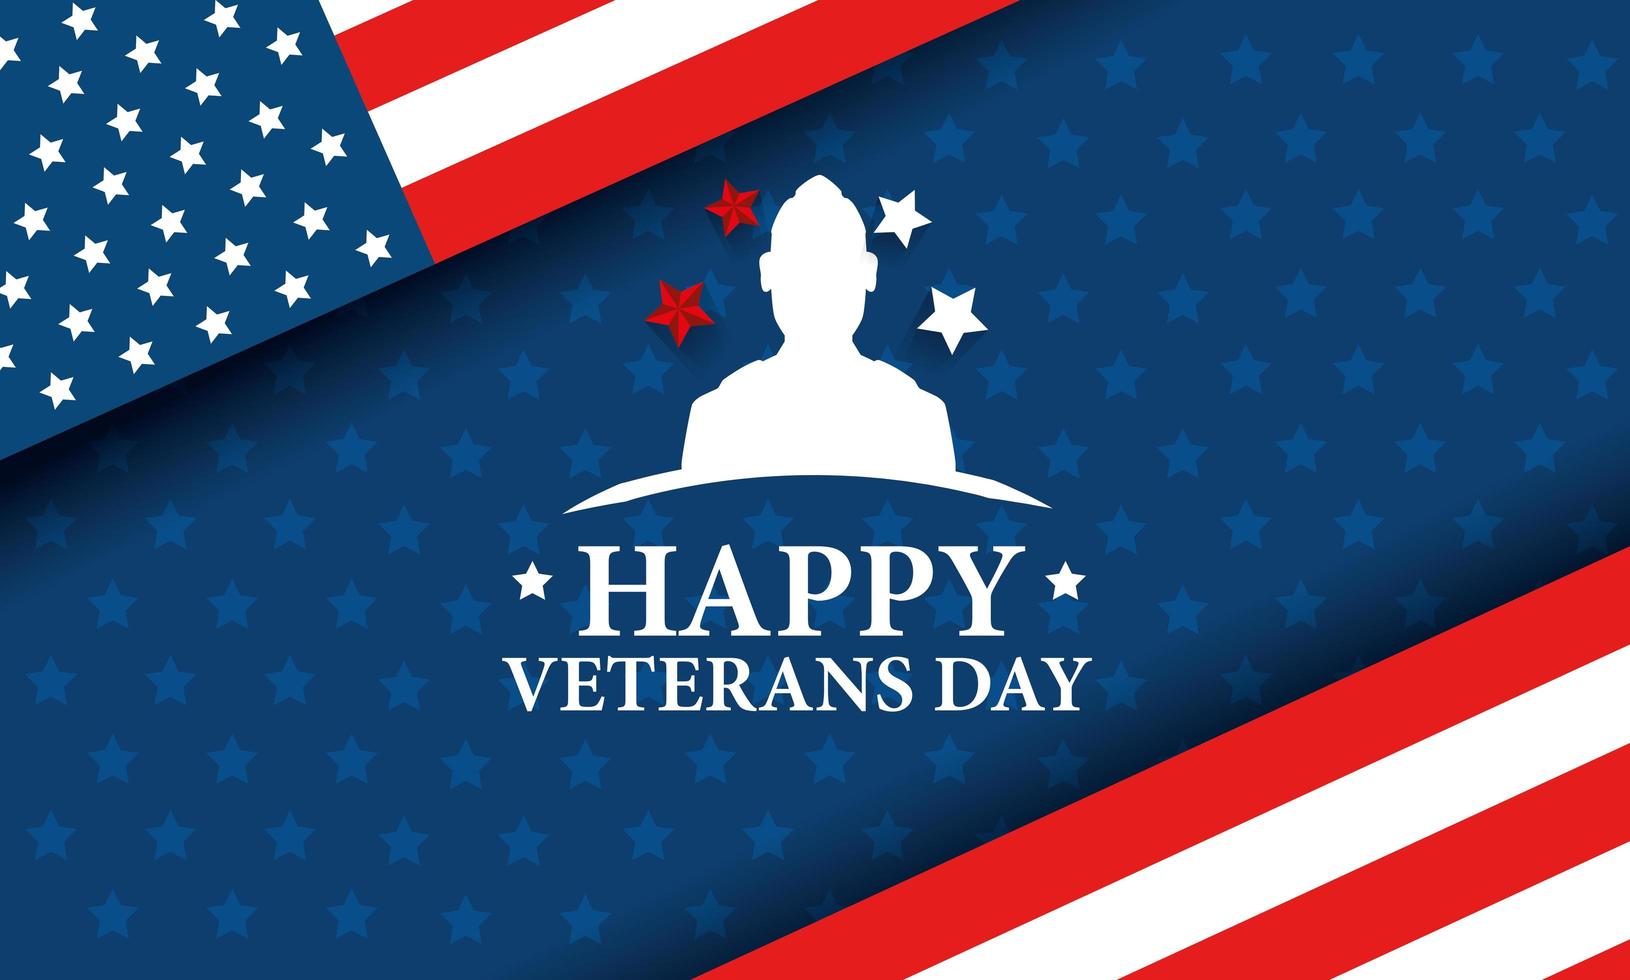 happy veterans day celebration with silhouette military and flag vector